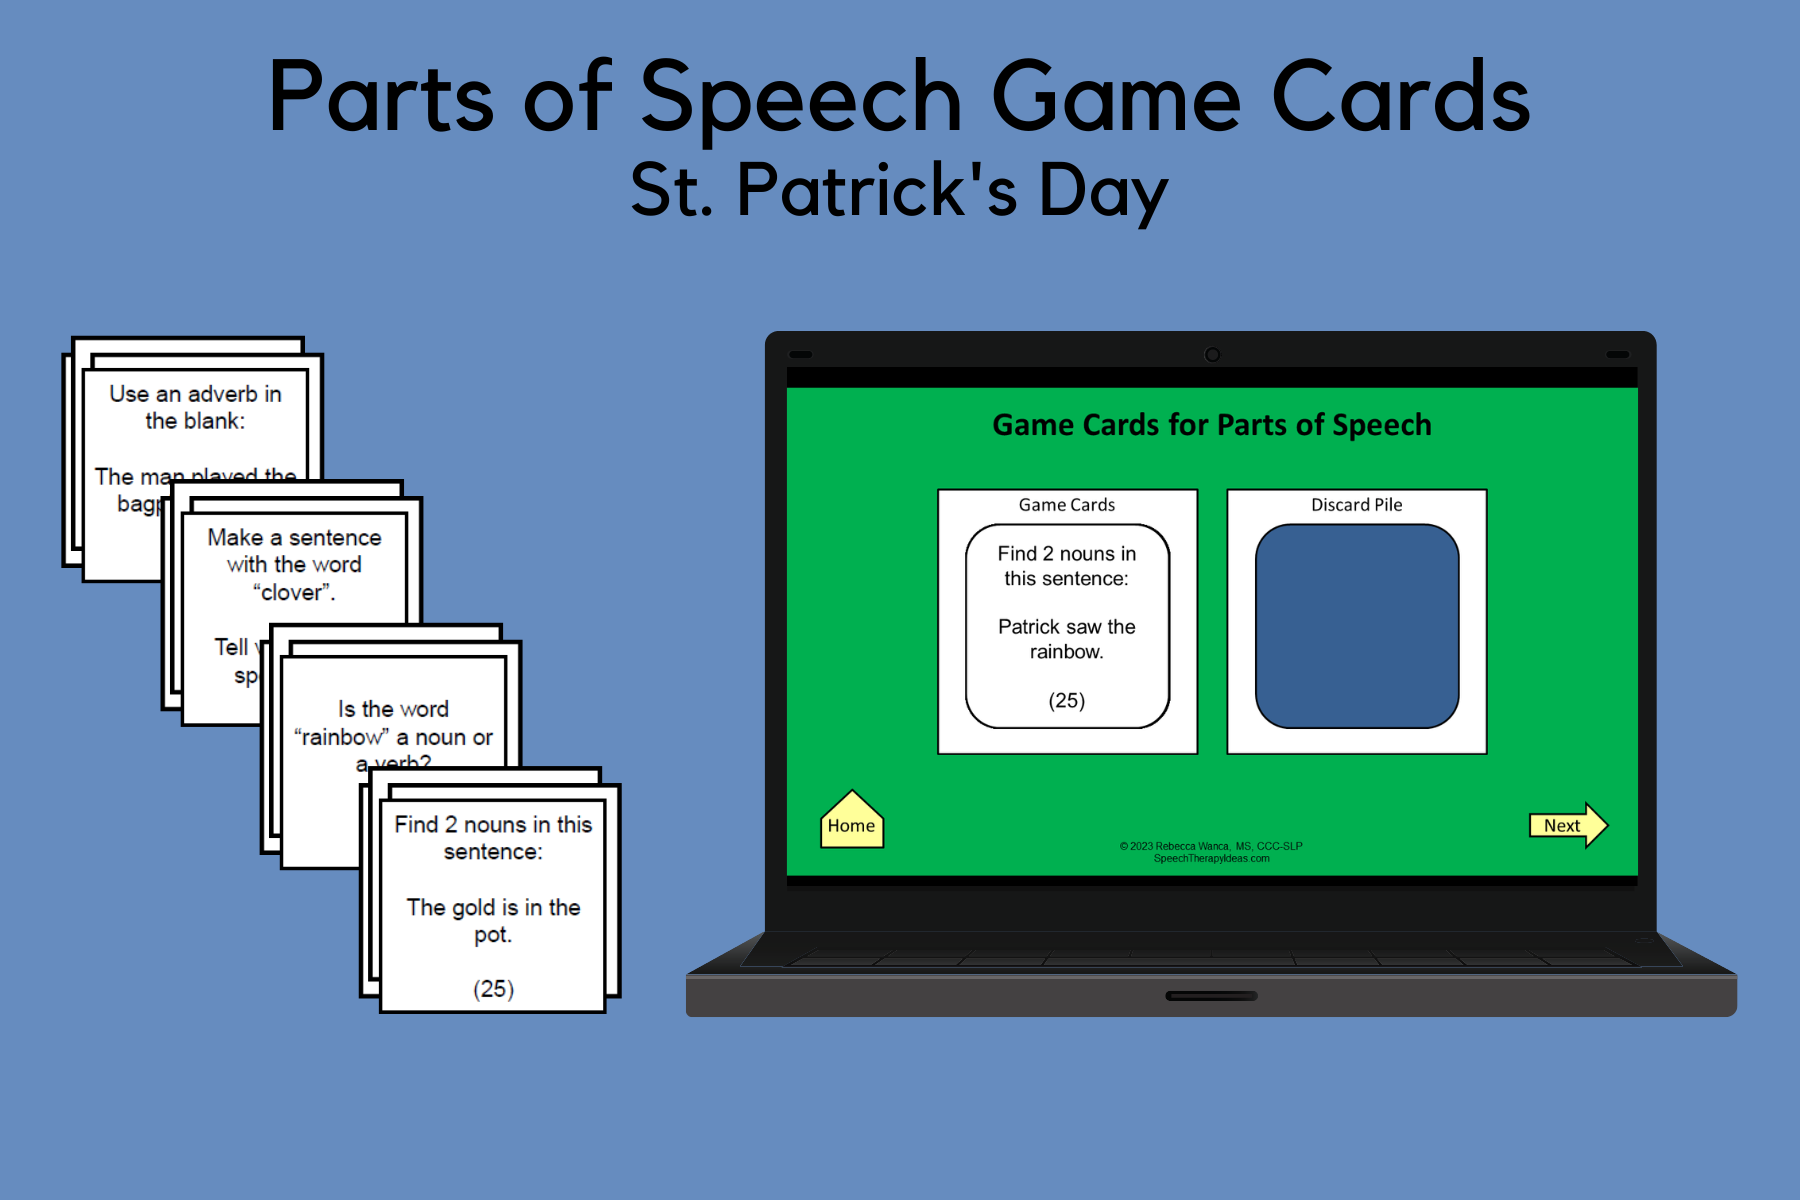 Parts of Speech Game Cards for St. Patrick’s Day